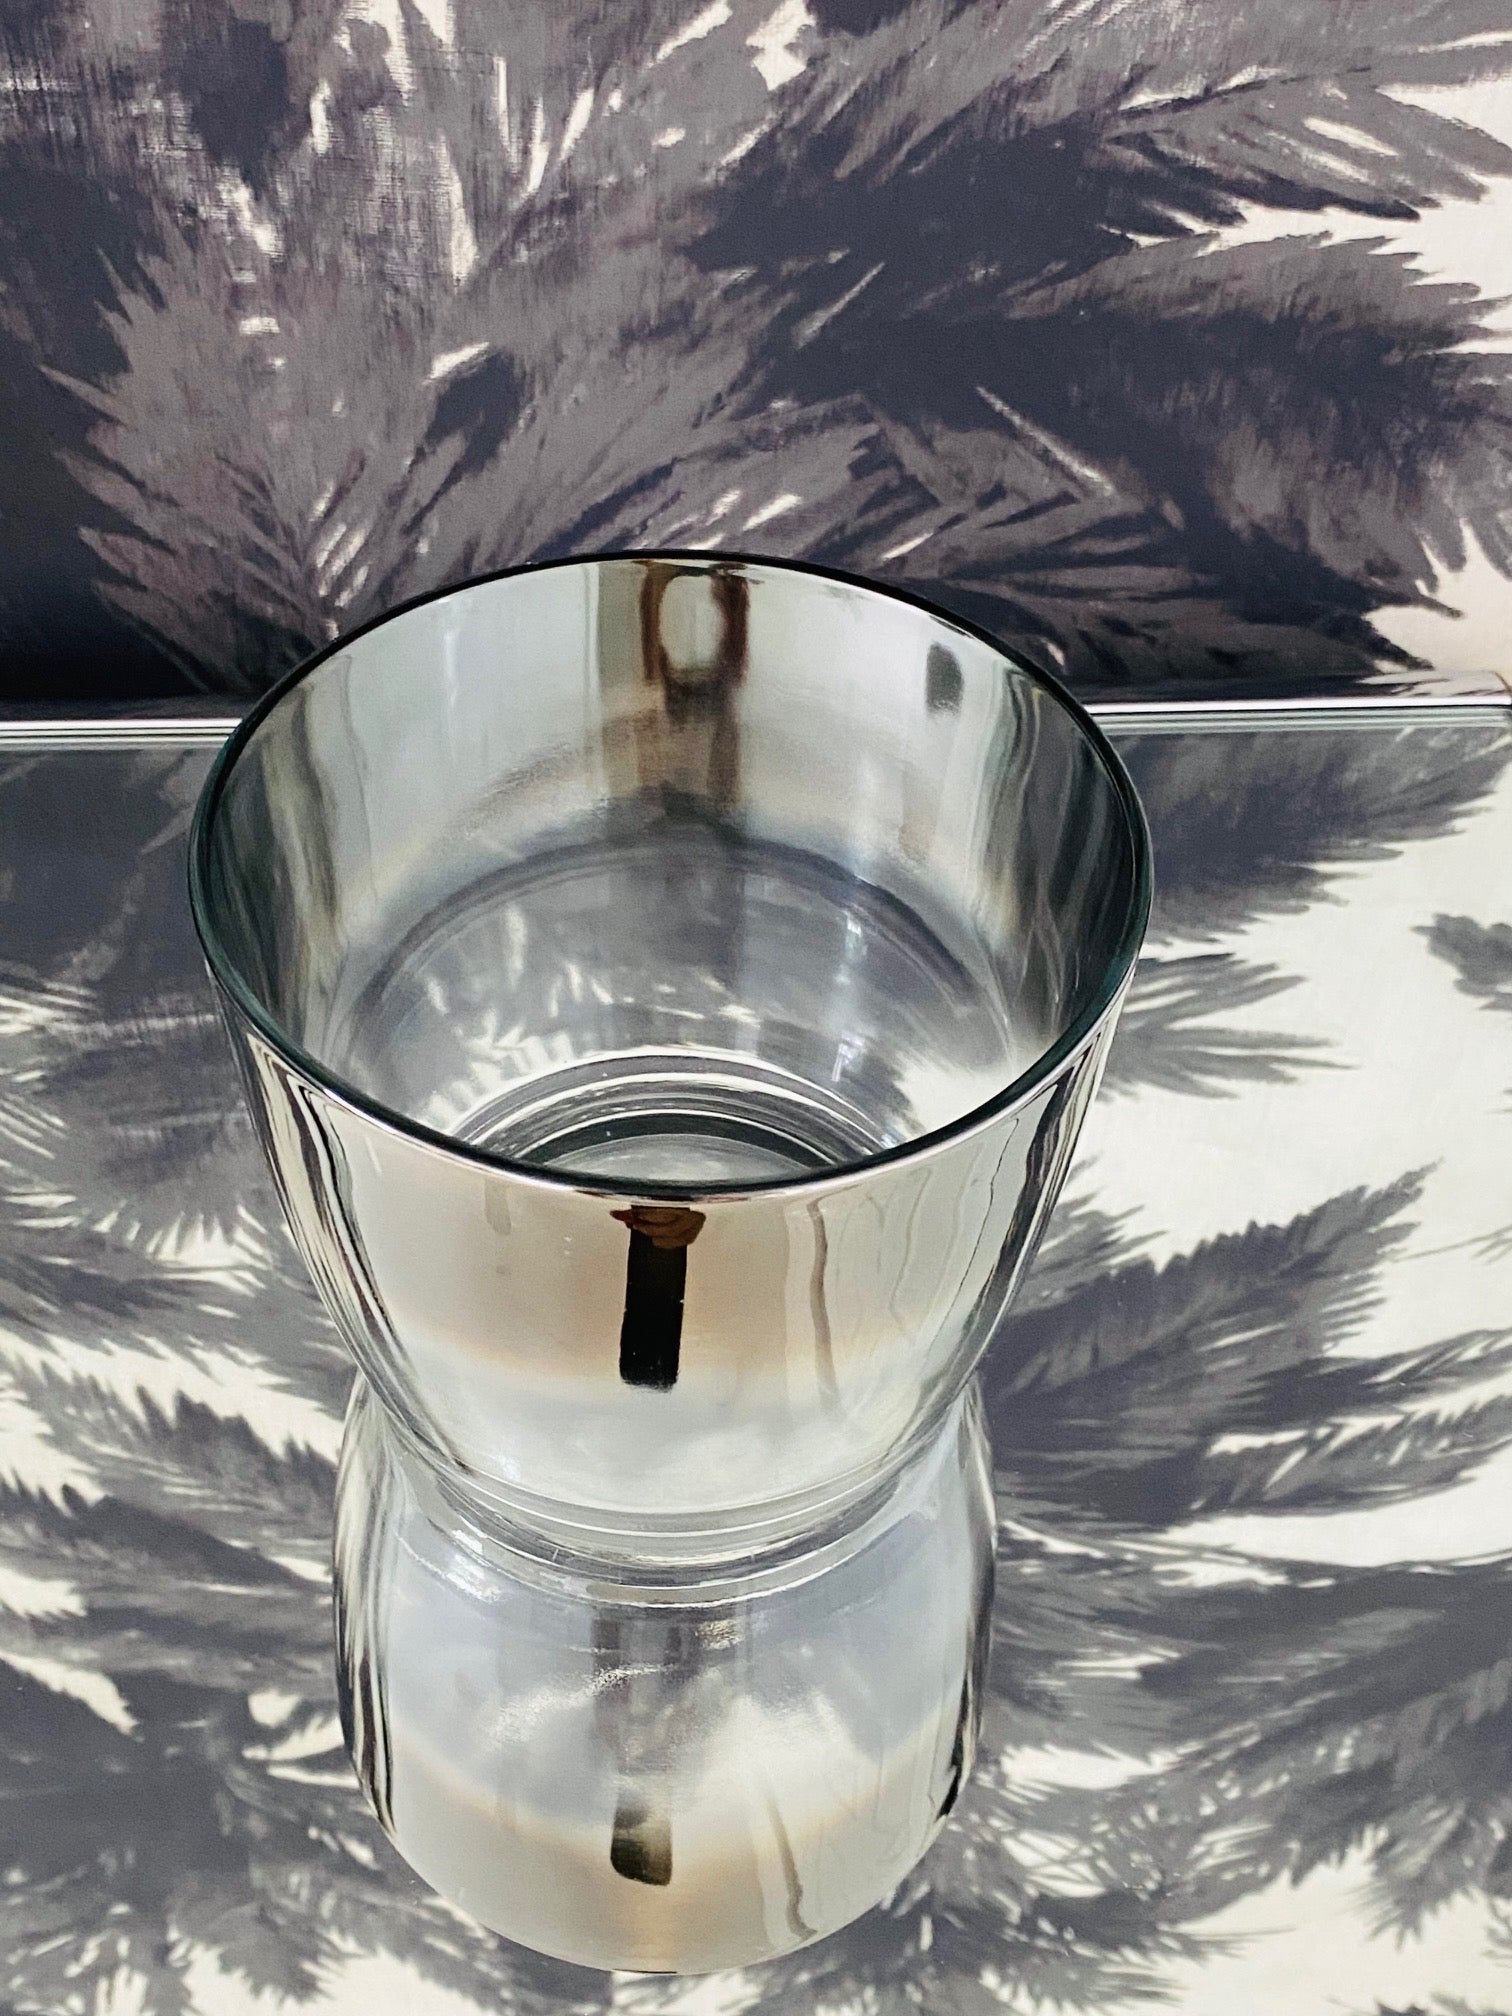 Hand-Crafted Mid-Century Modern Ice Bucket with Silver Fade Ombré Design, c. 1960's